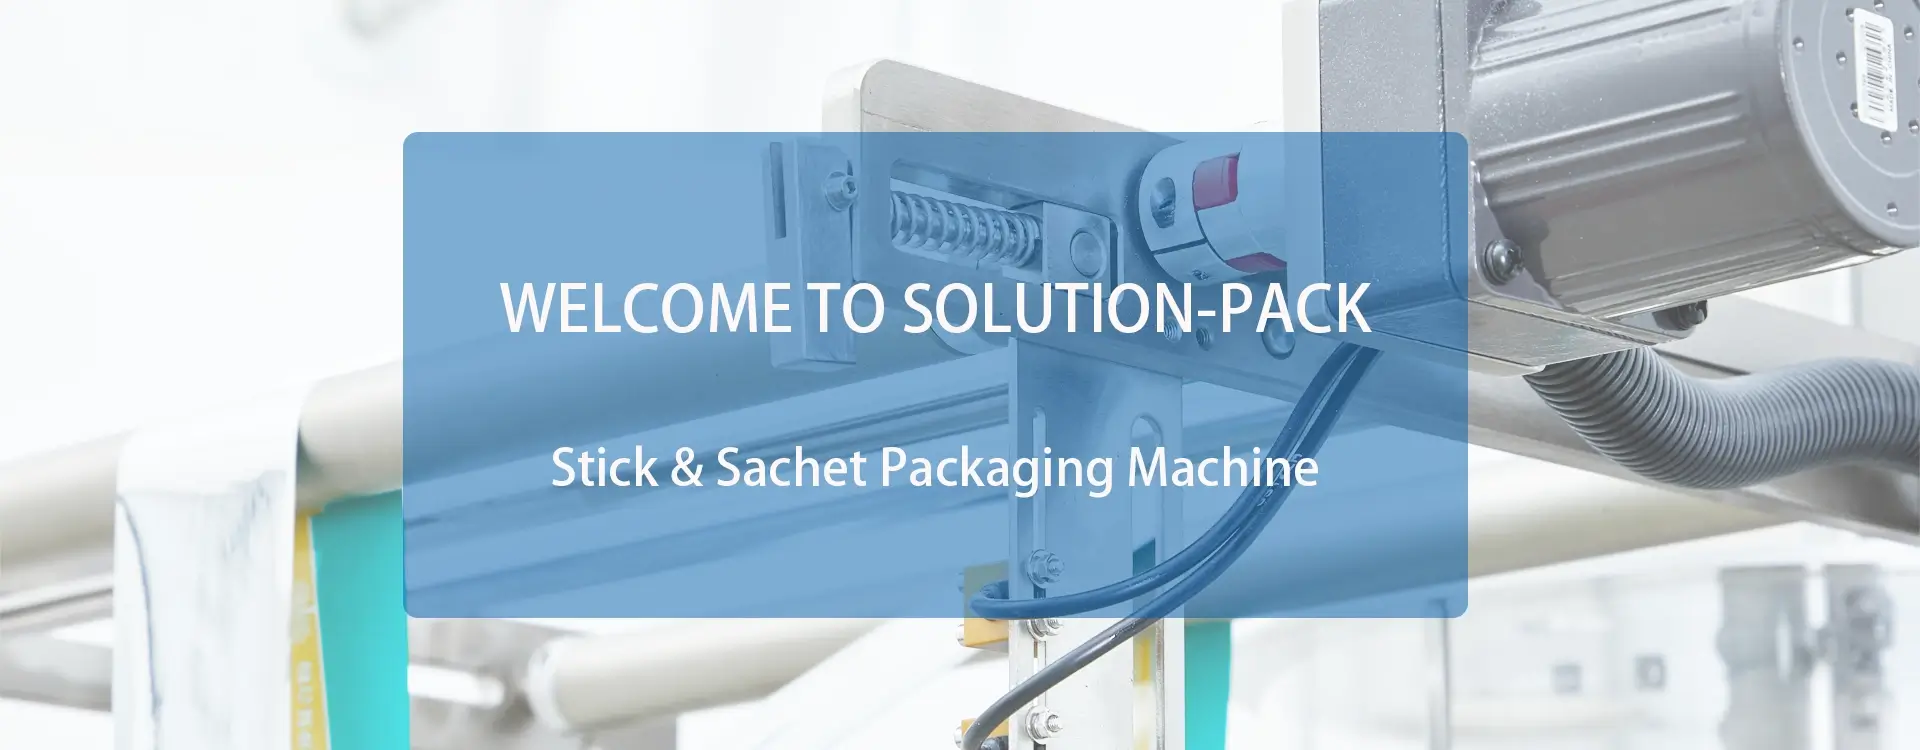 Model F3-100 Automatic Powder 3-Side Seal Sachet Packaging Machine Unit Bottom Banner Picture | Solution-Pack